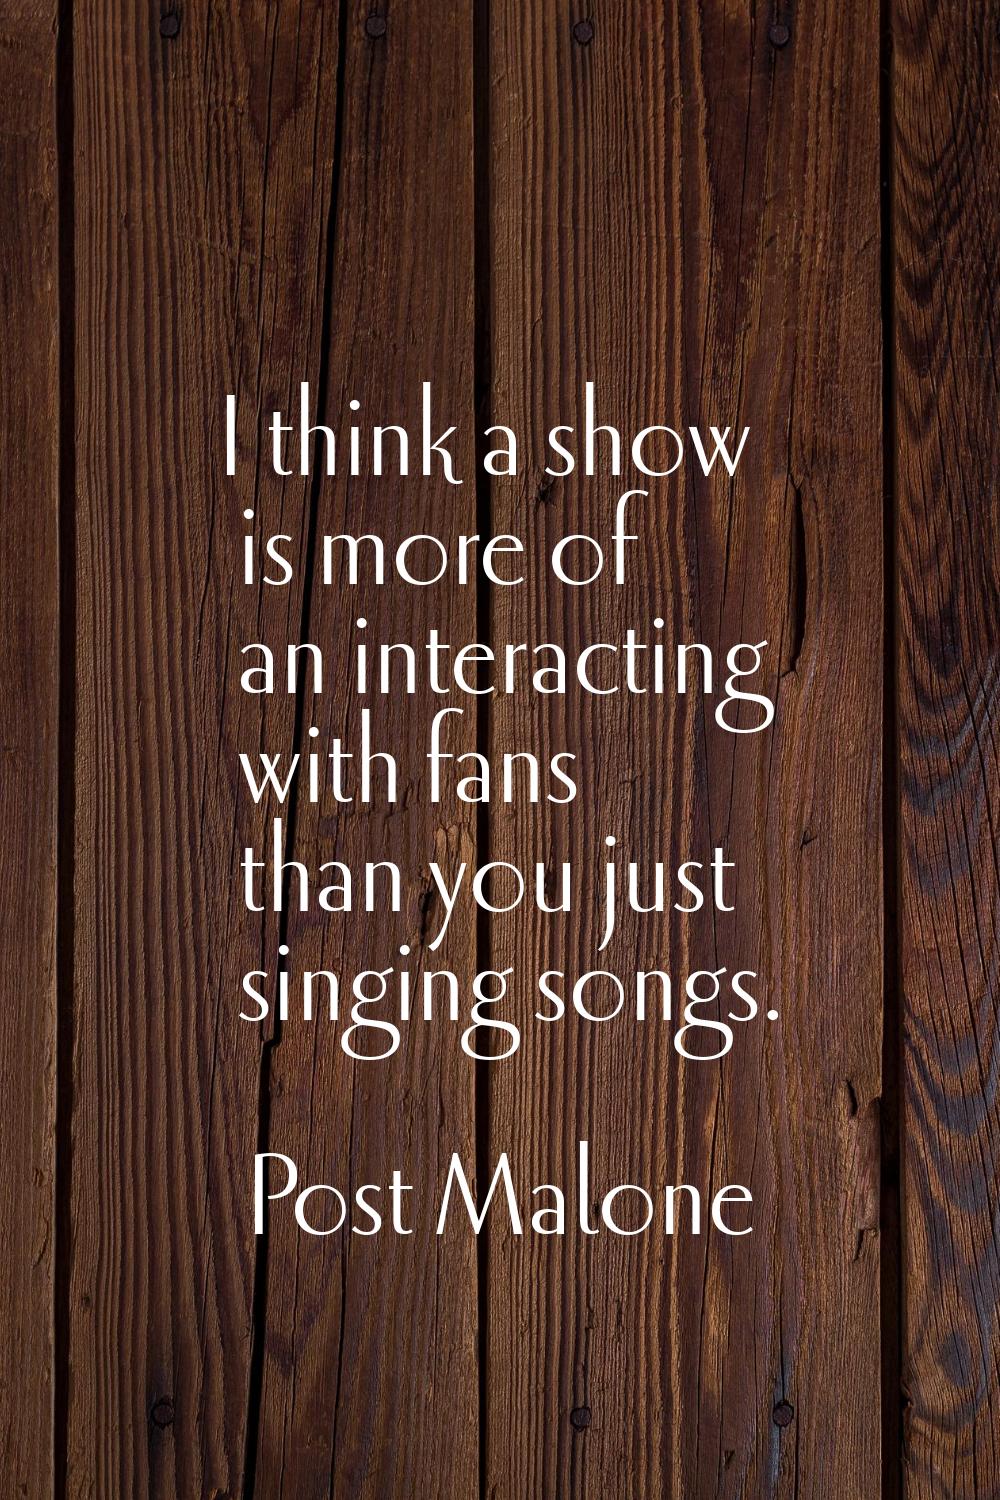 I think a show is more of an interacting with fans than you just singing songs.